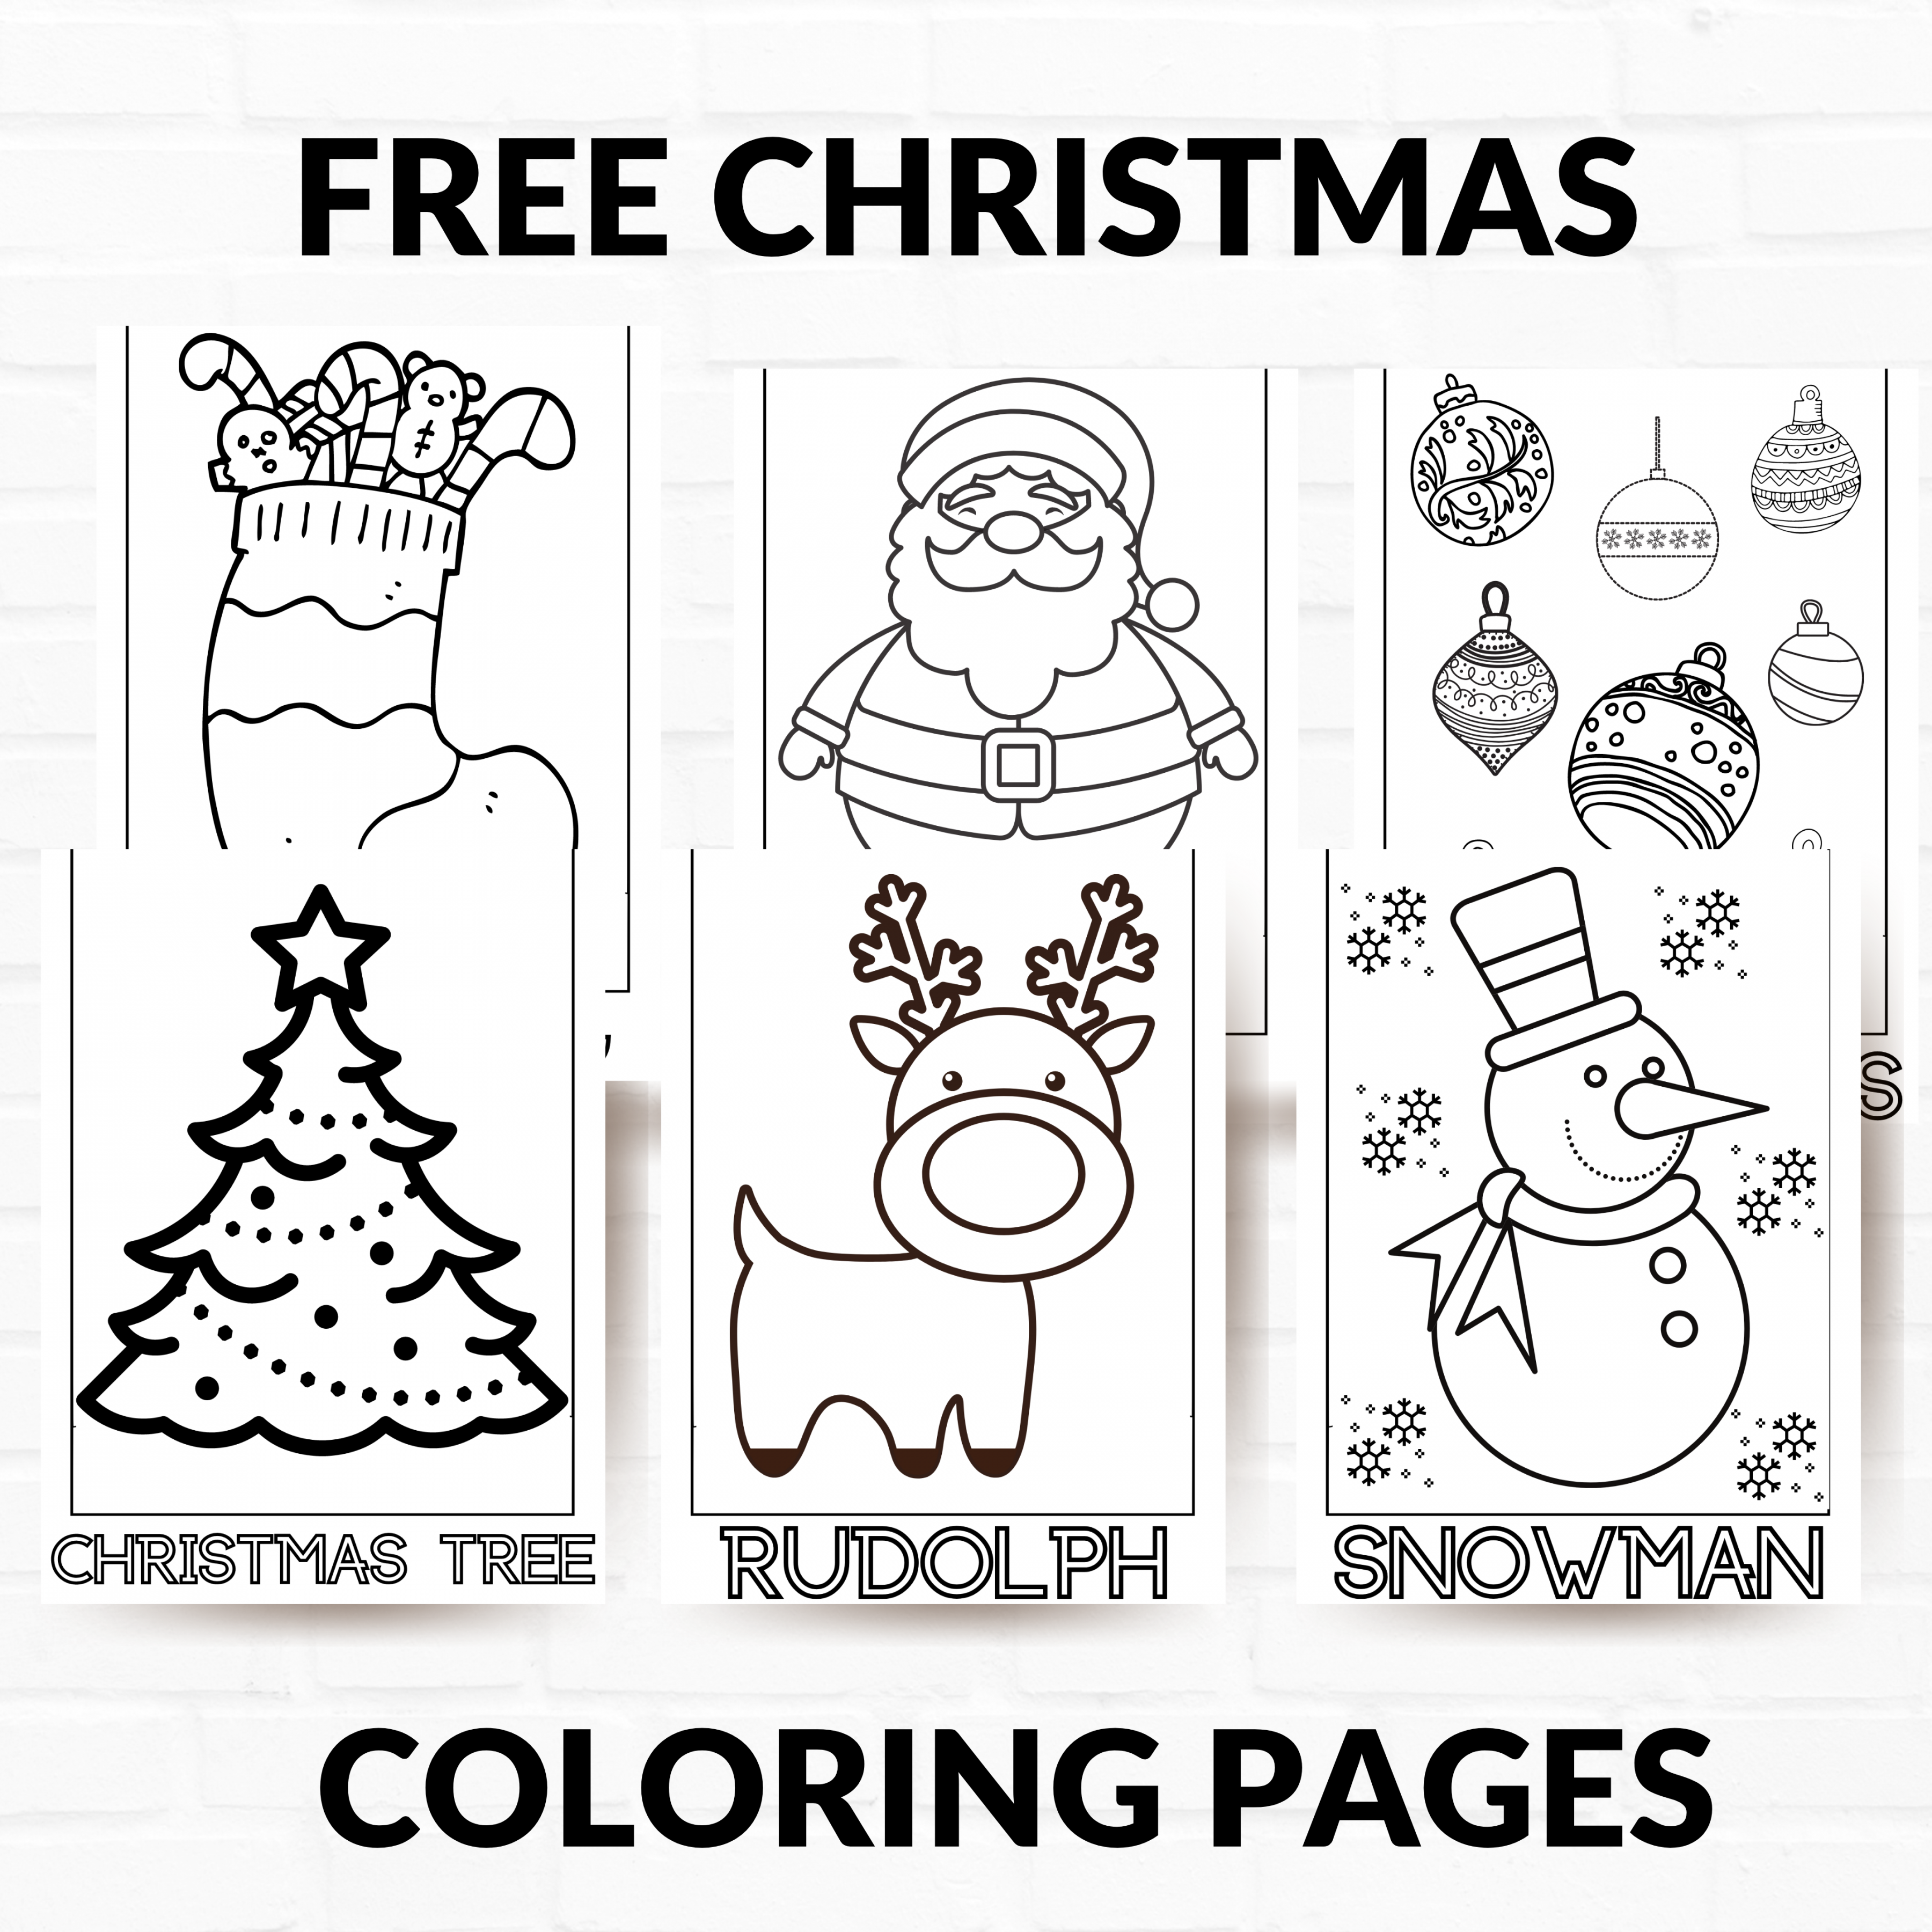 Free Christmas Coloring Pages Printable - Printable - Free Printable Christmas Coloring Pages - About a Mom